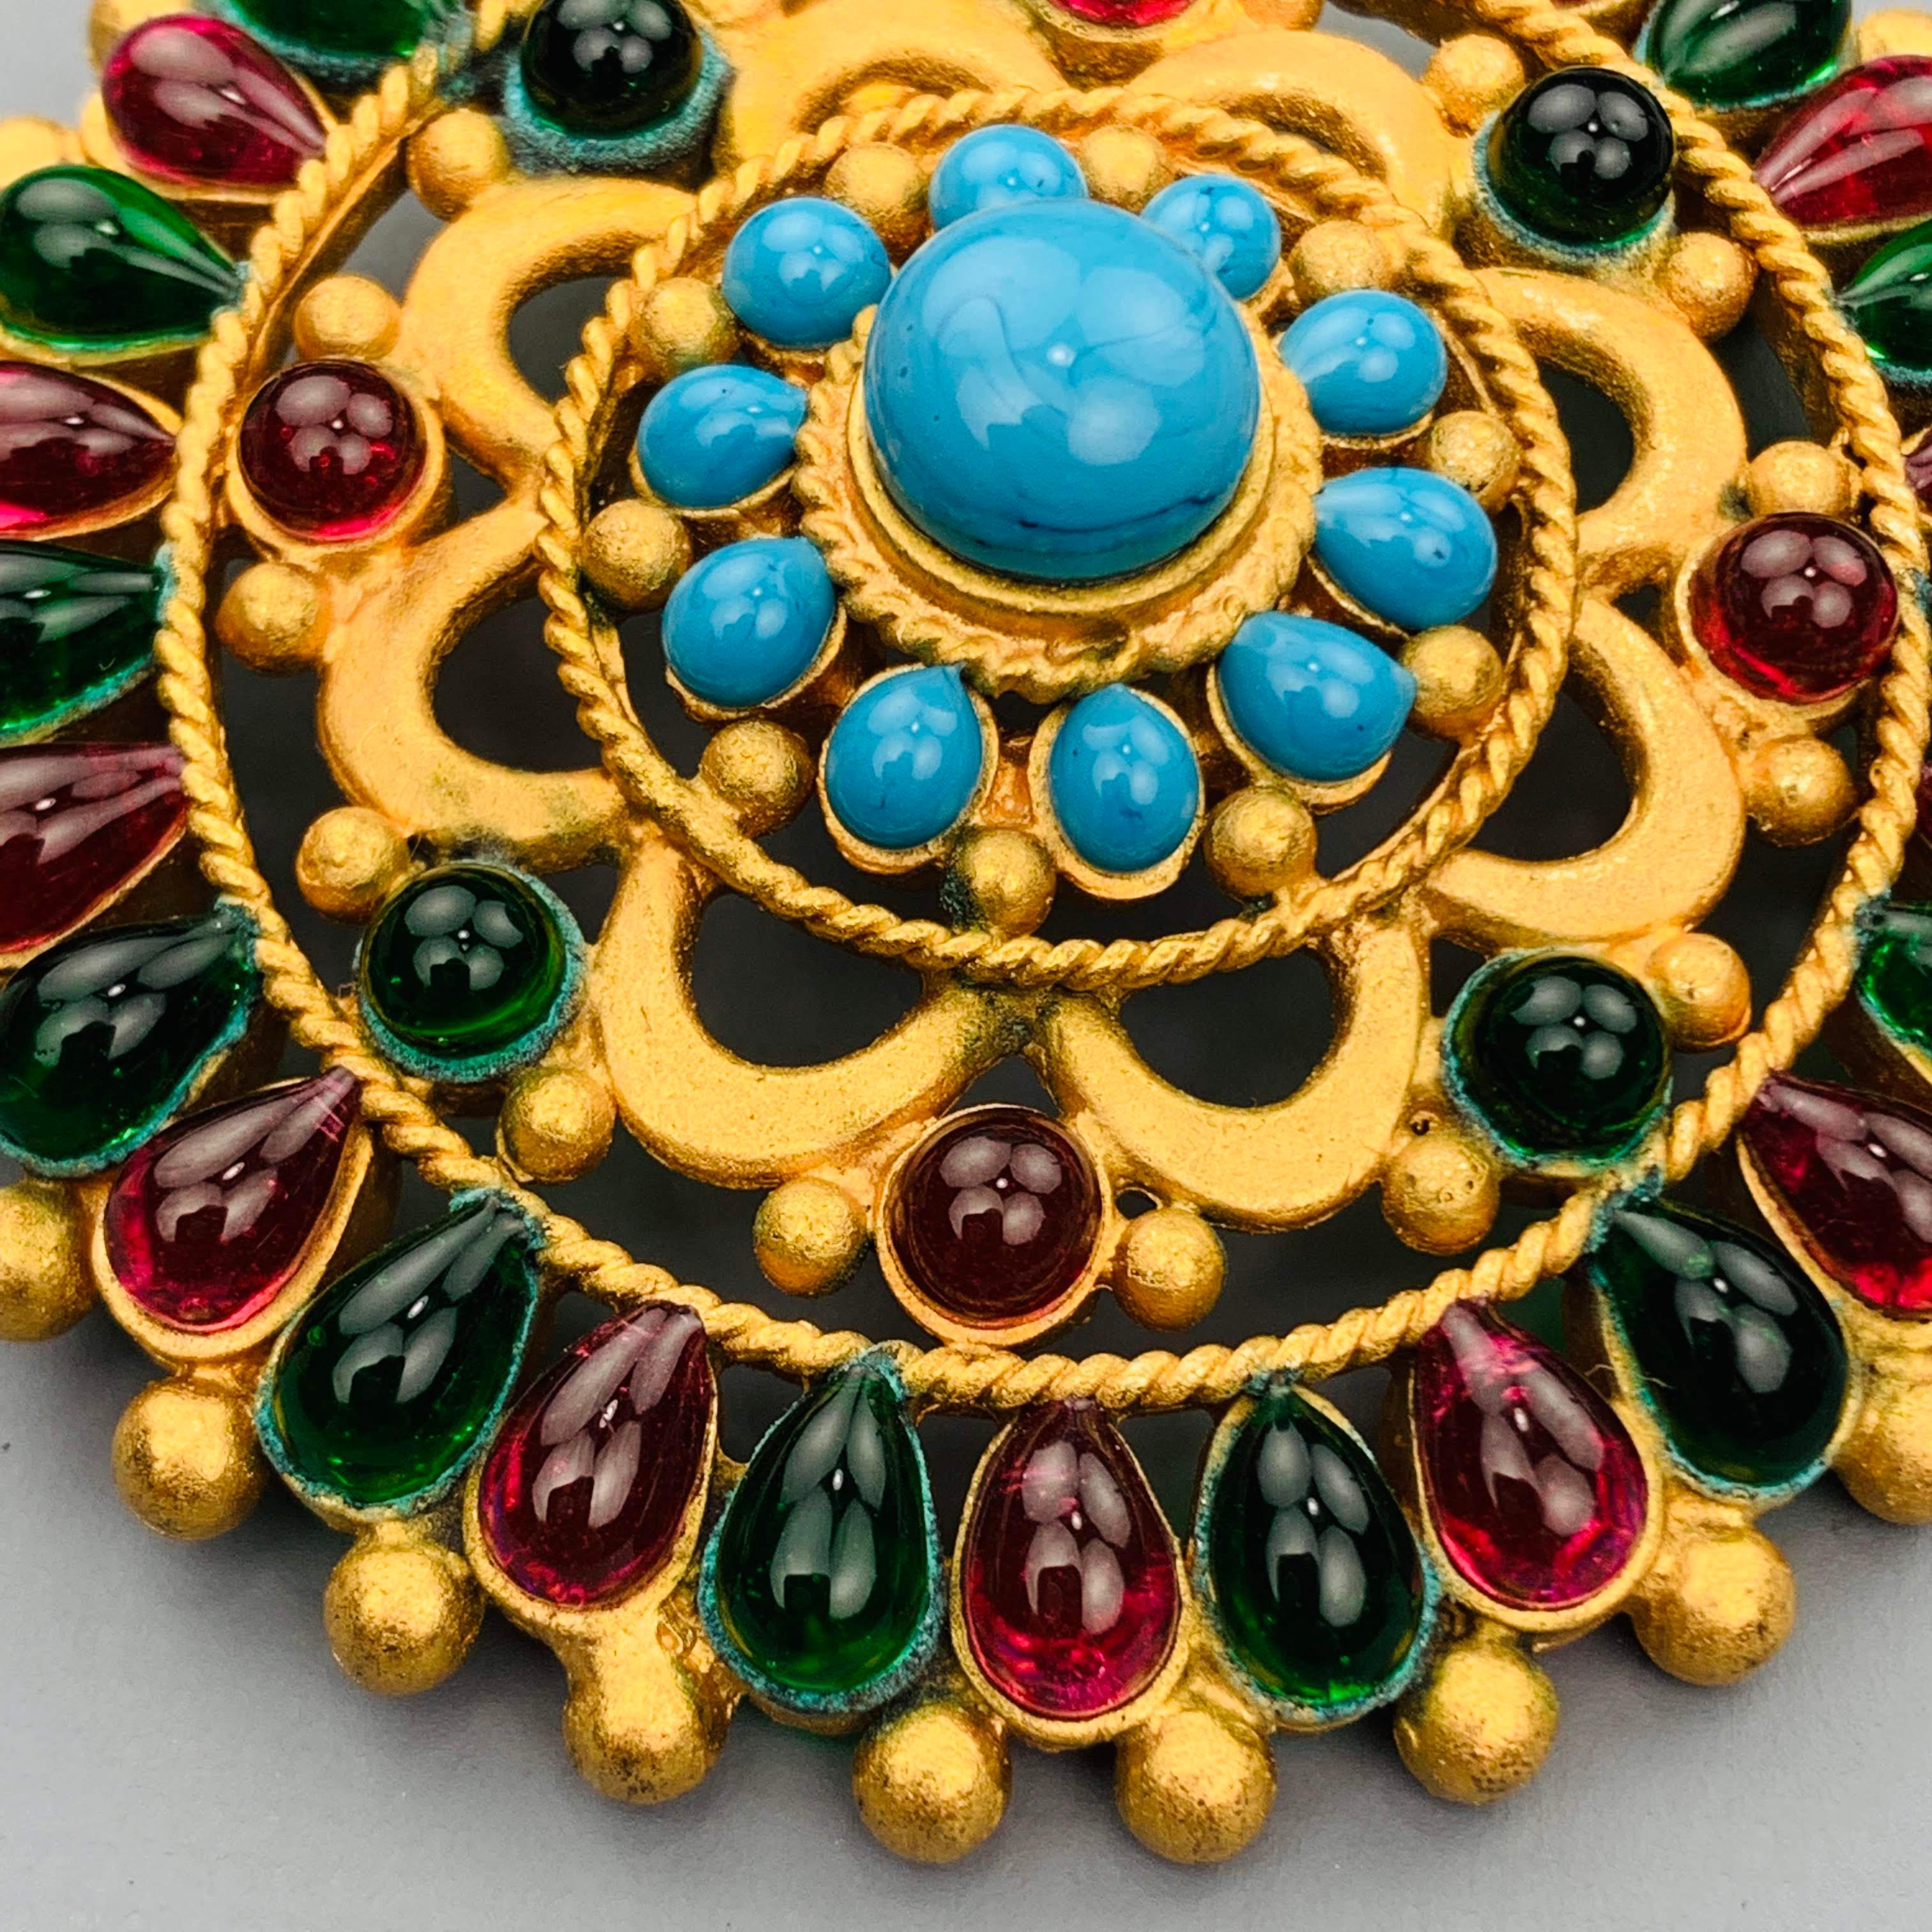 Vintage CHANEL circa 1993 Byzantine style Gripoix pin pendant comes in yellow gold tone metal with green and red glass stones and a faux turquoise center. Pin on back is missing needle bar and has a hook for a belt. As-is. Made in France.
 
Very